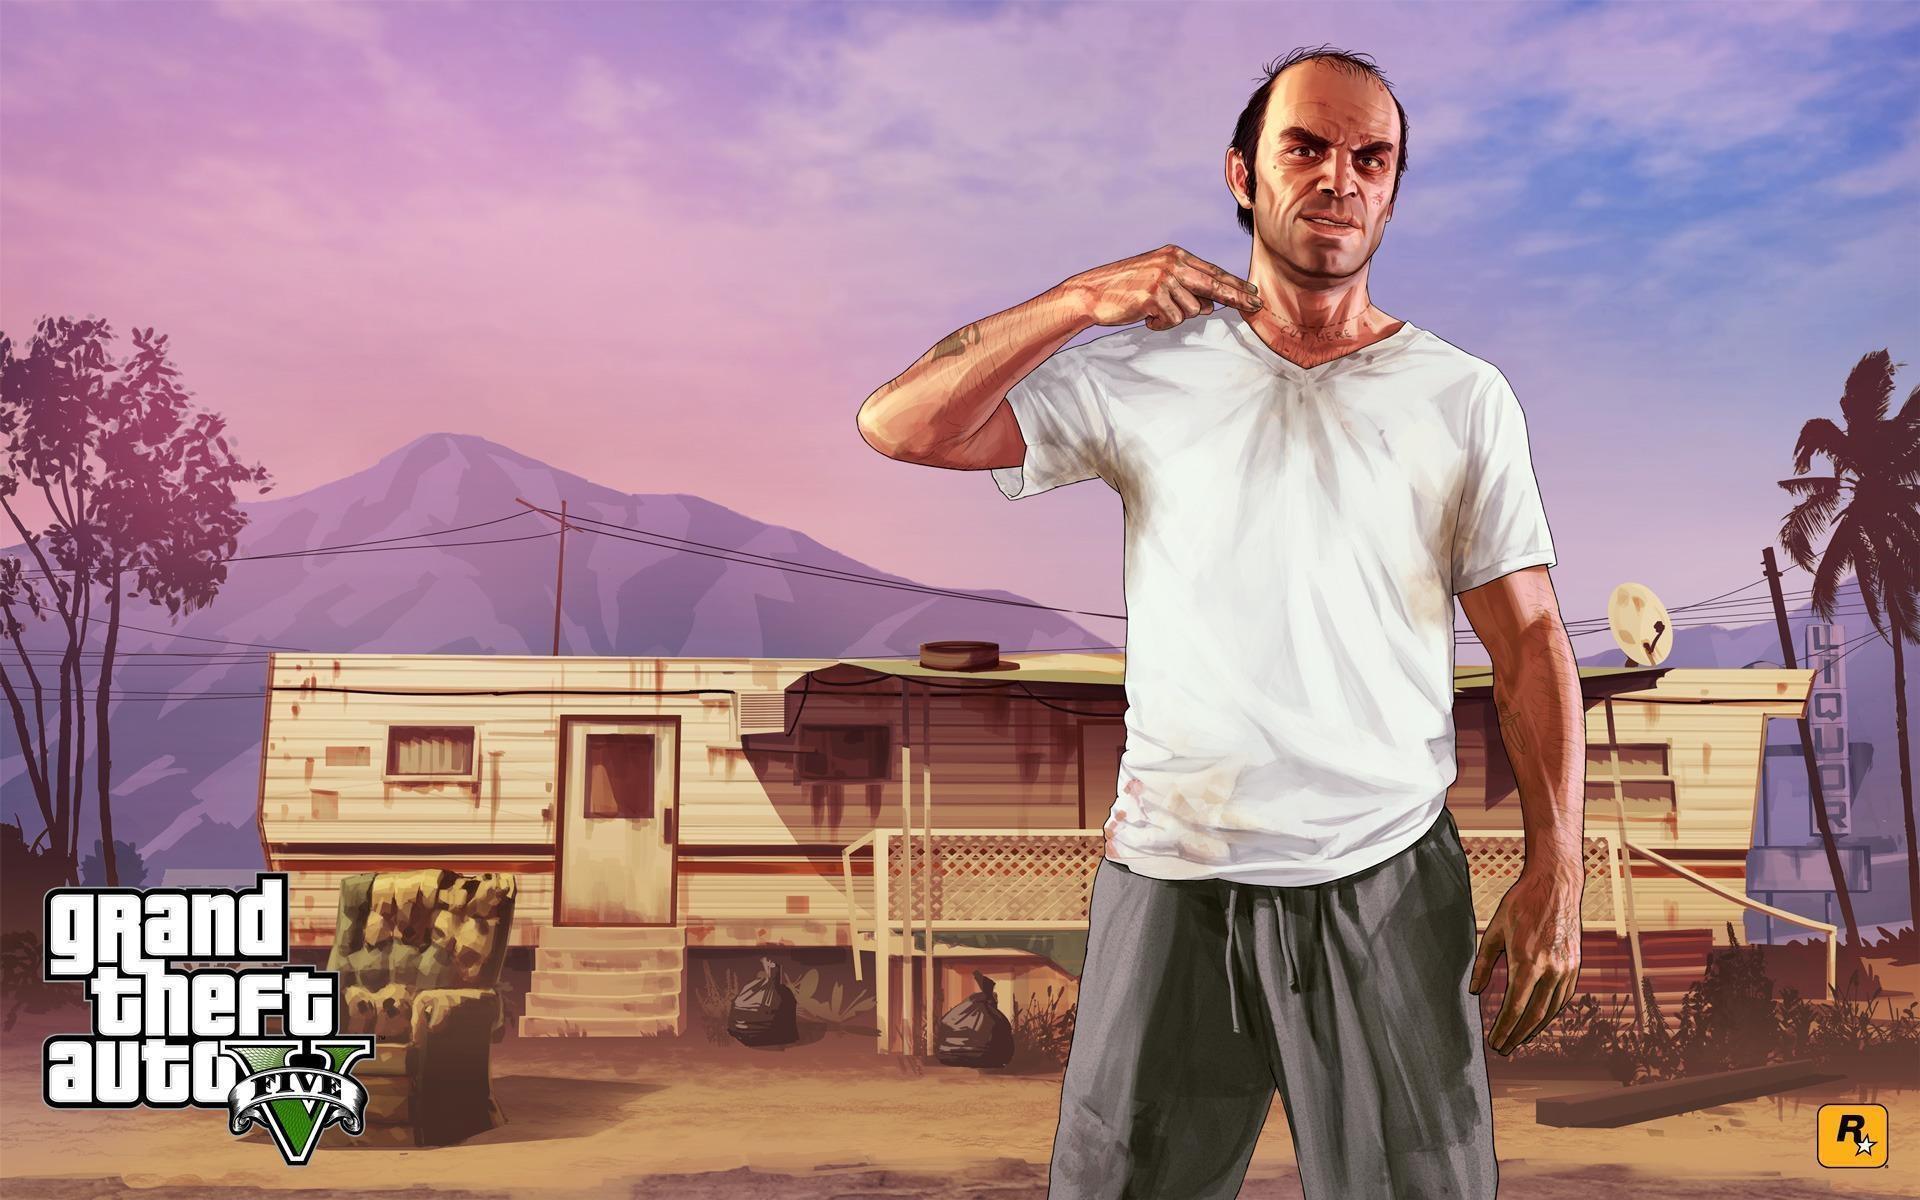 Grand Theft Auto V, Breathtaking wallpapers, Immersive gaming experience, Captivating visuals, 1920x1200 HD Desktop